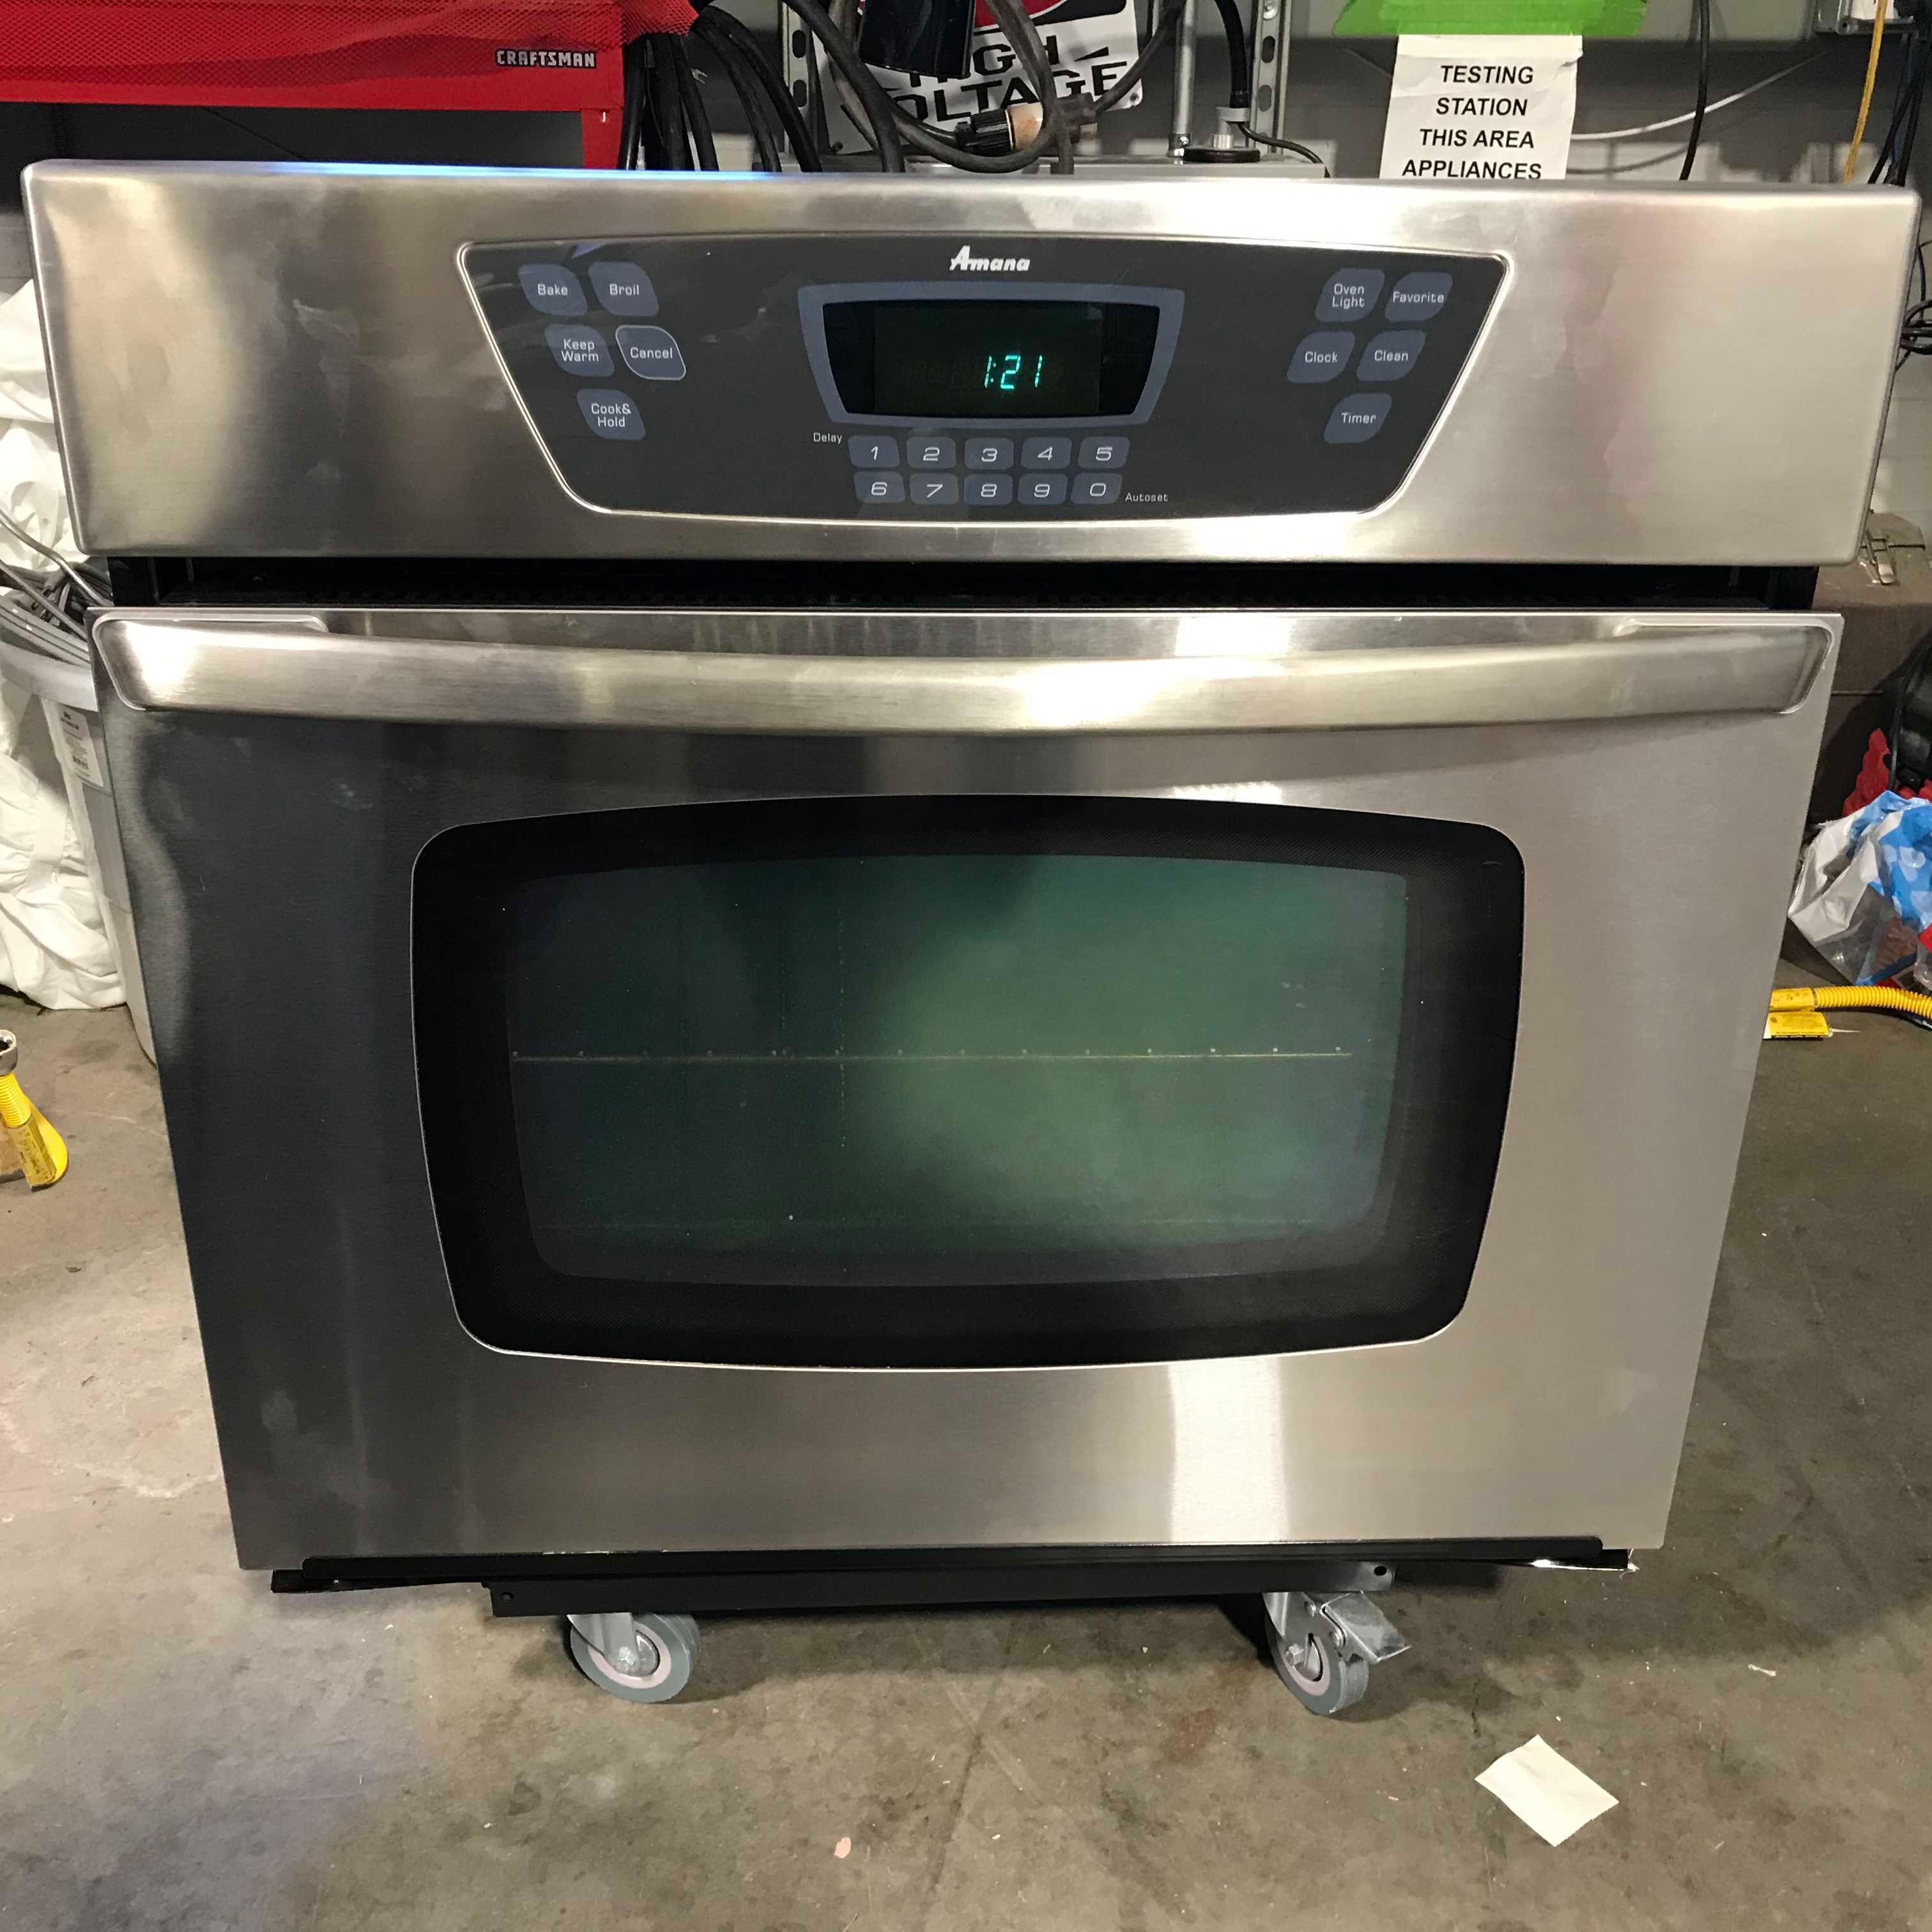 30"x 27"x 28" Stainless Steel Amana Wall Oven